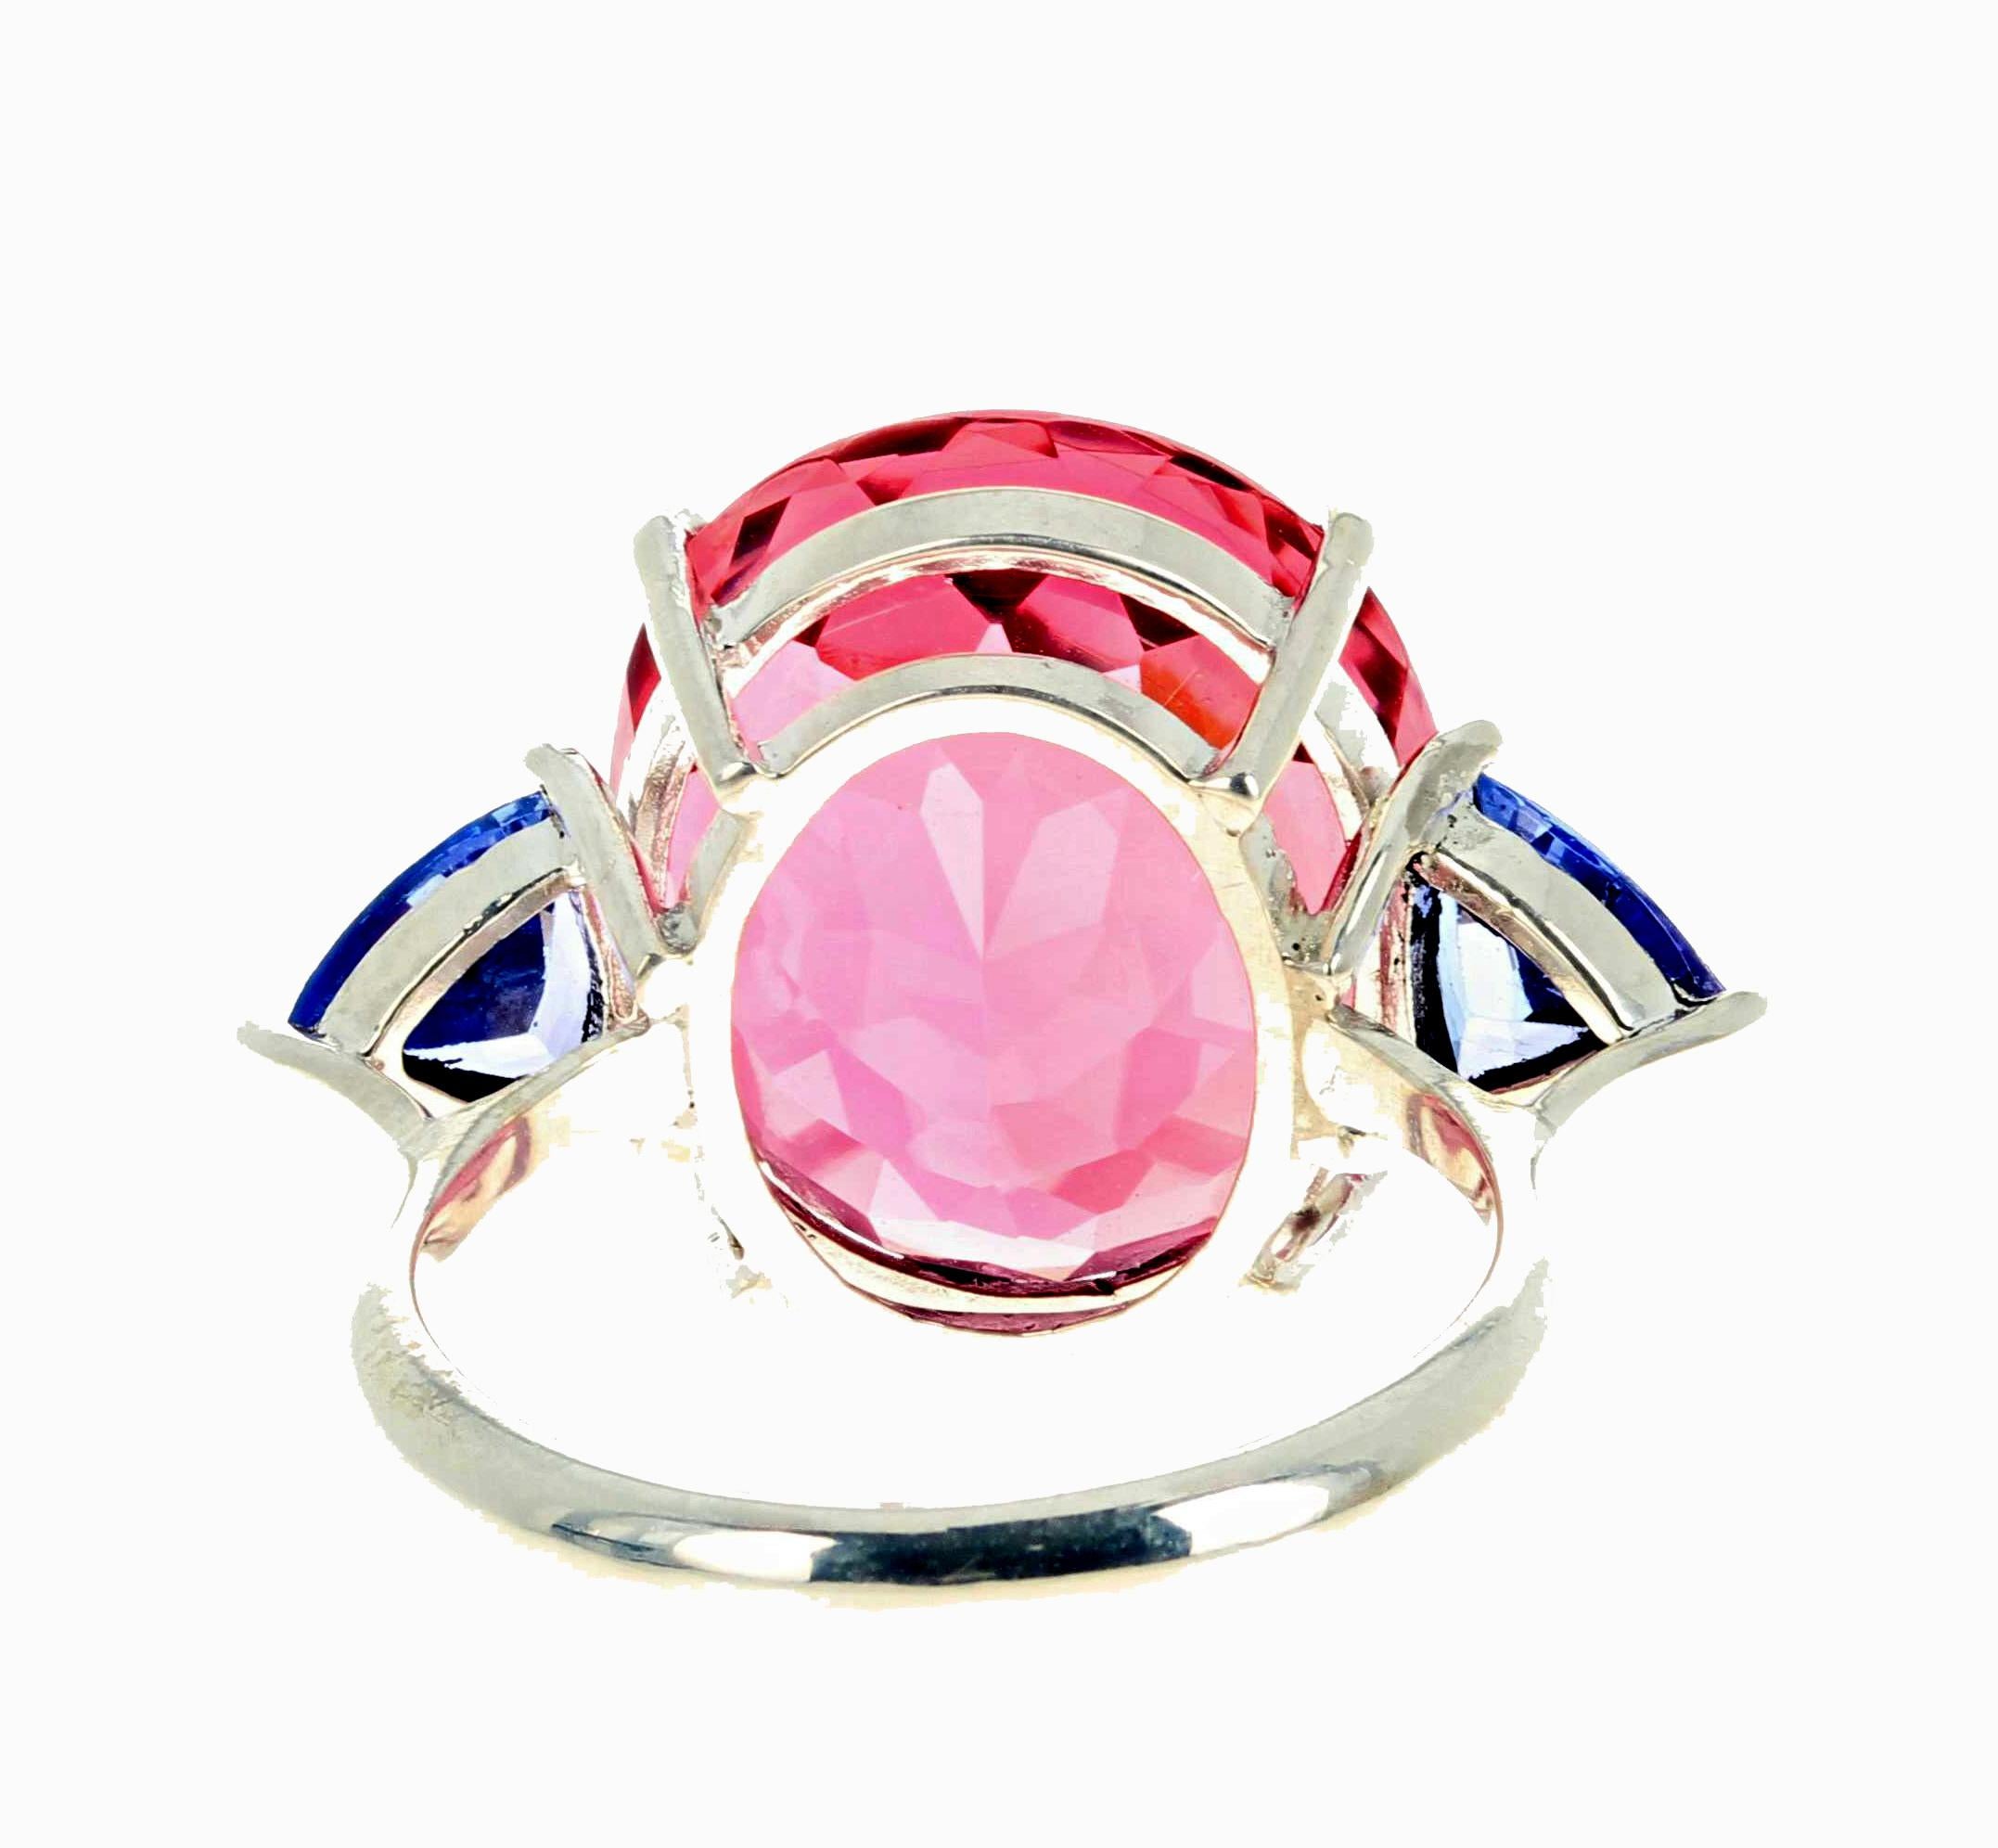 AJD Amazingly Intensely Pink 15.7 Carat 